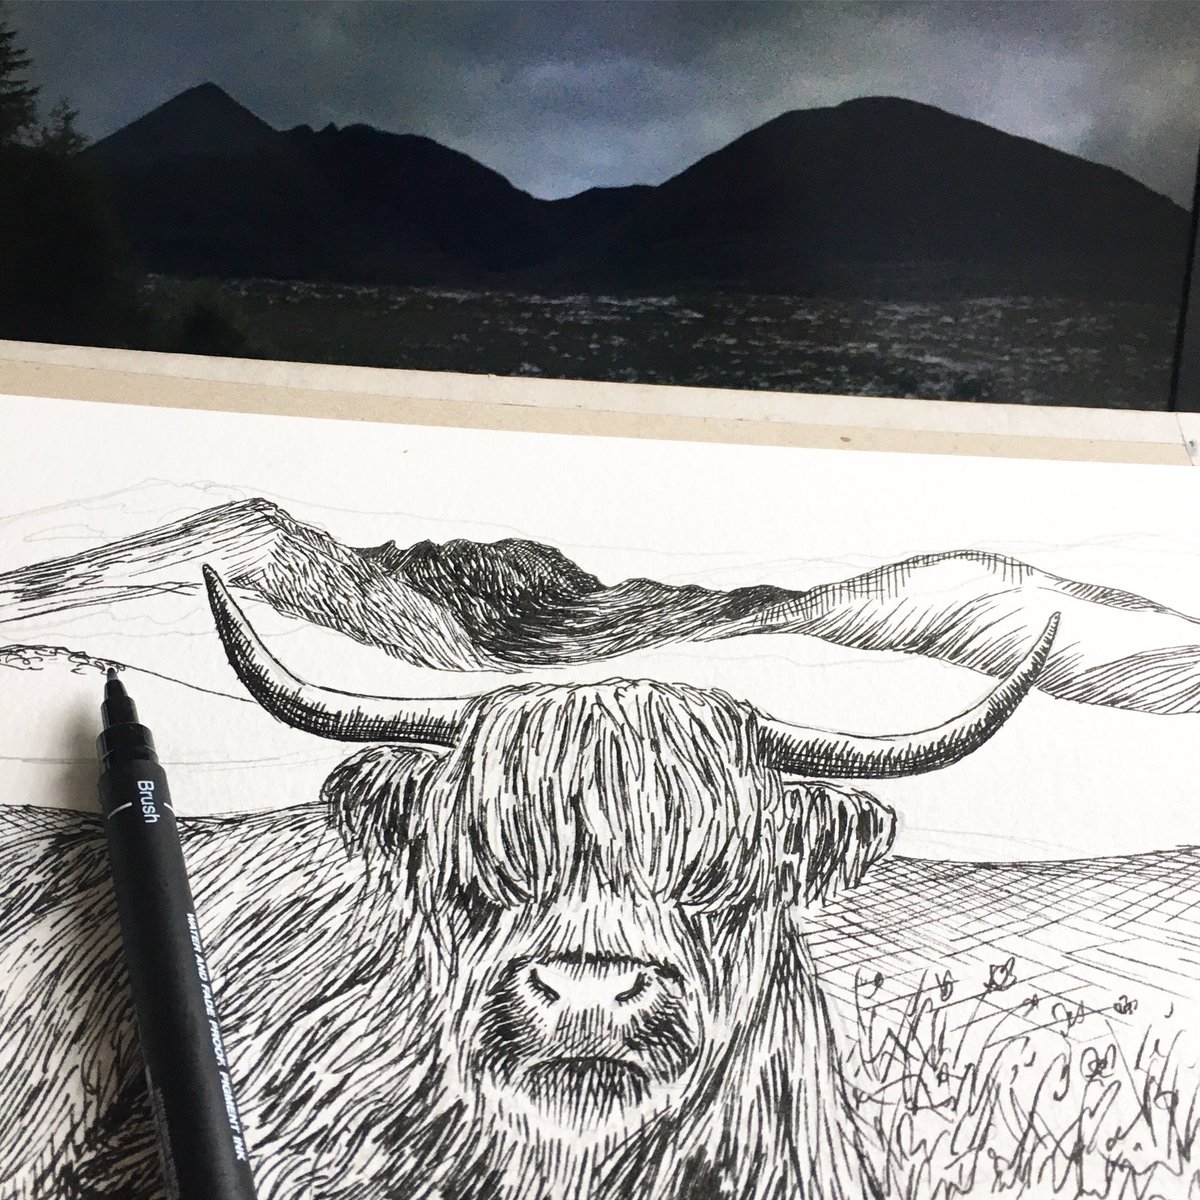 Inspired by our trip to Wester Ross I’m mixing a few photos together to add some peaks behind this beautiful highland cow. 
A work in progress but I’ll let you know how I get on 😊
#highlandlife #highlandcow #visitscotland #wip #highlandcowsofinstagram #ink #scotlandsketcher